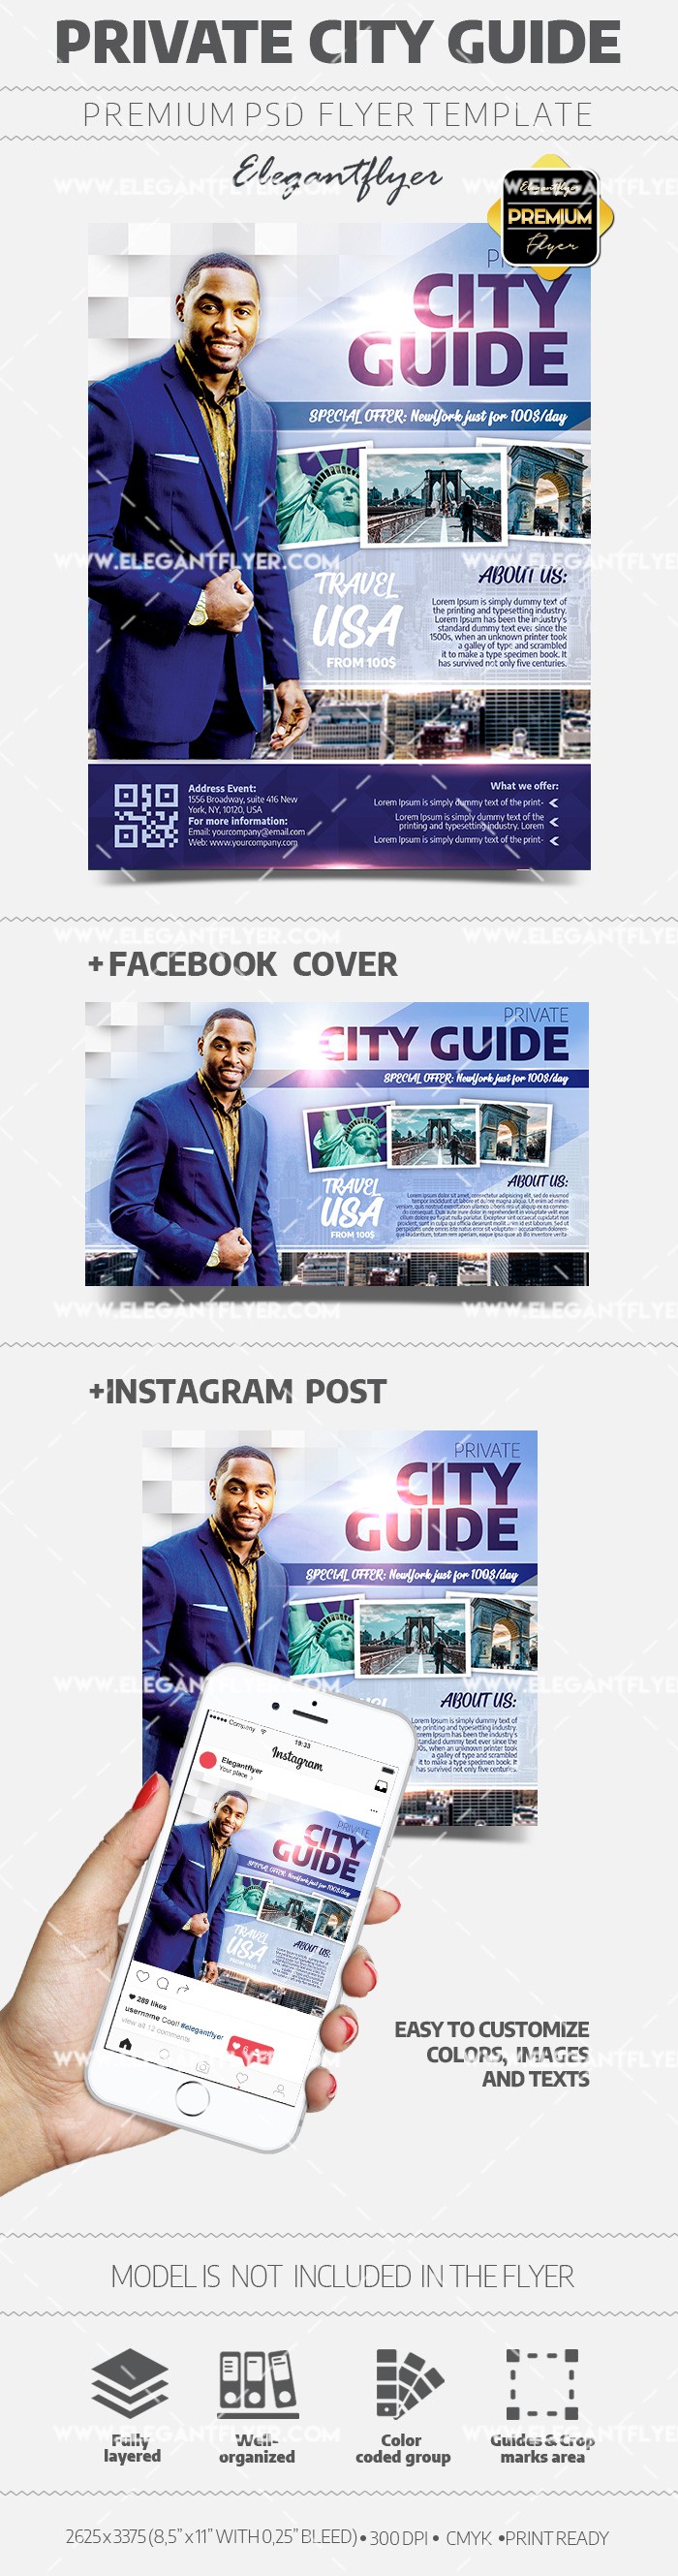 Private City Guide by ElegantFlyer